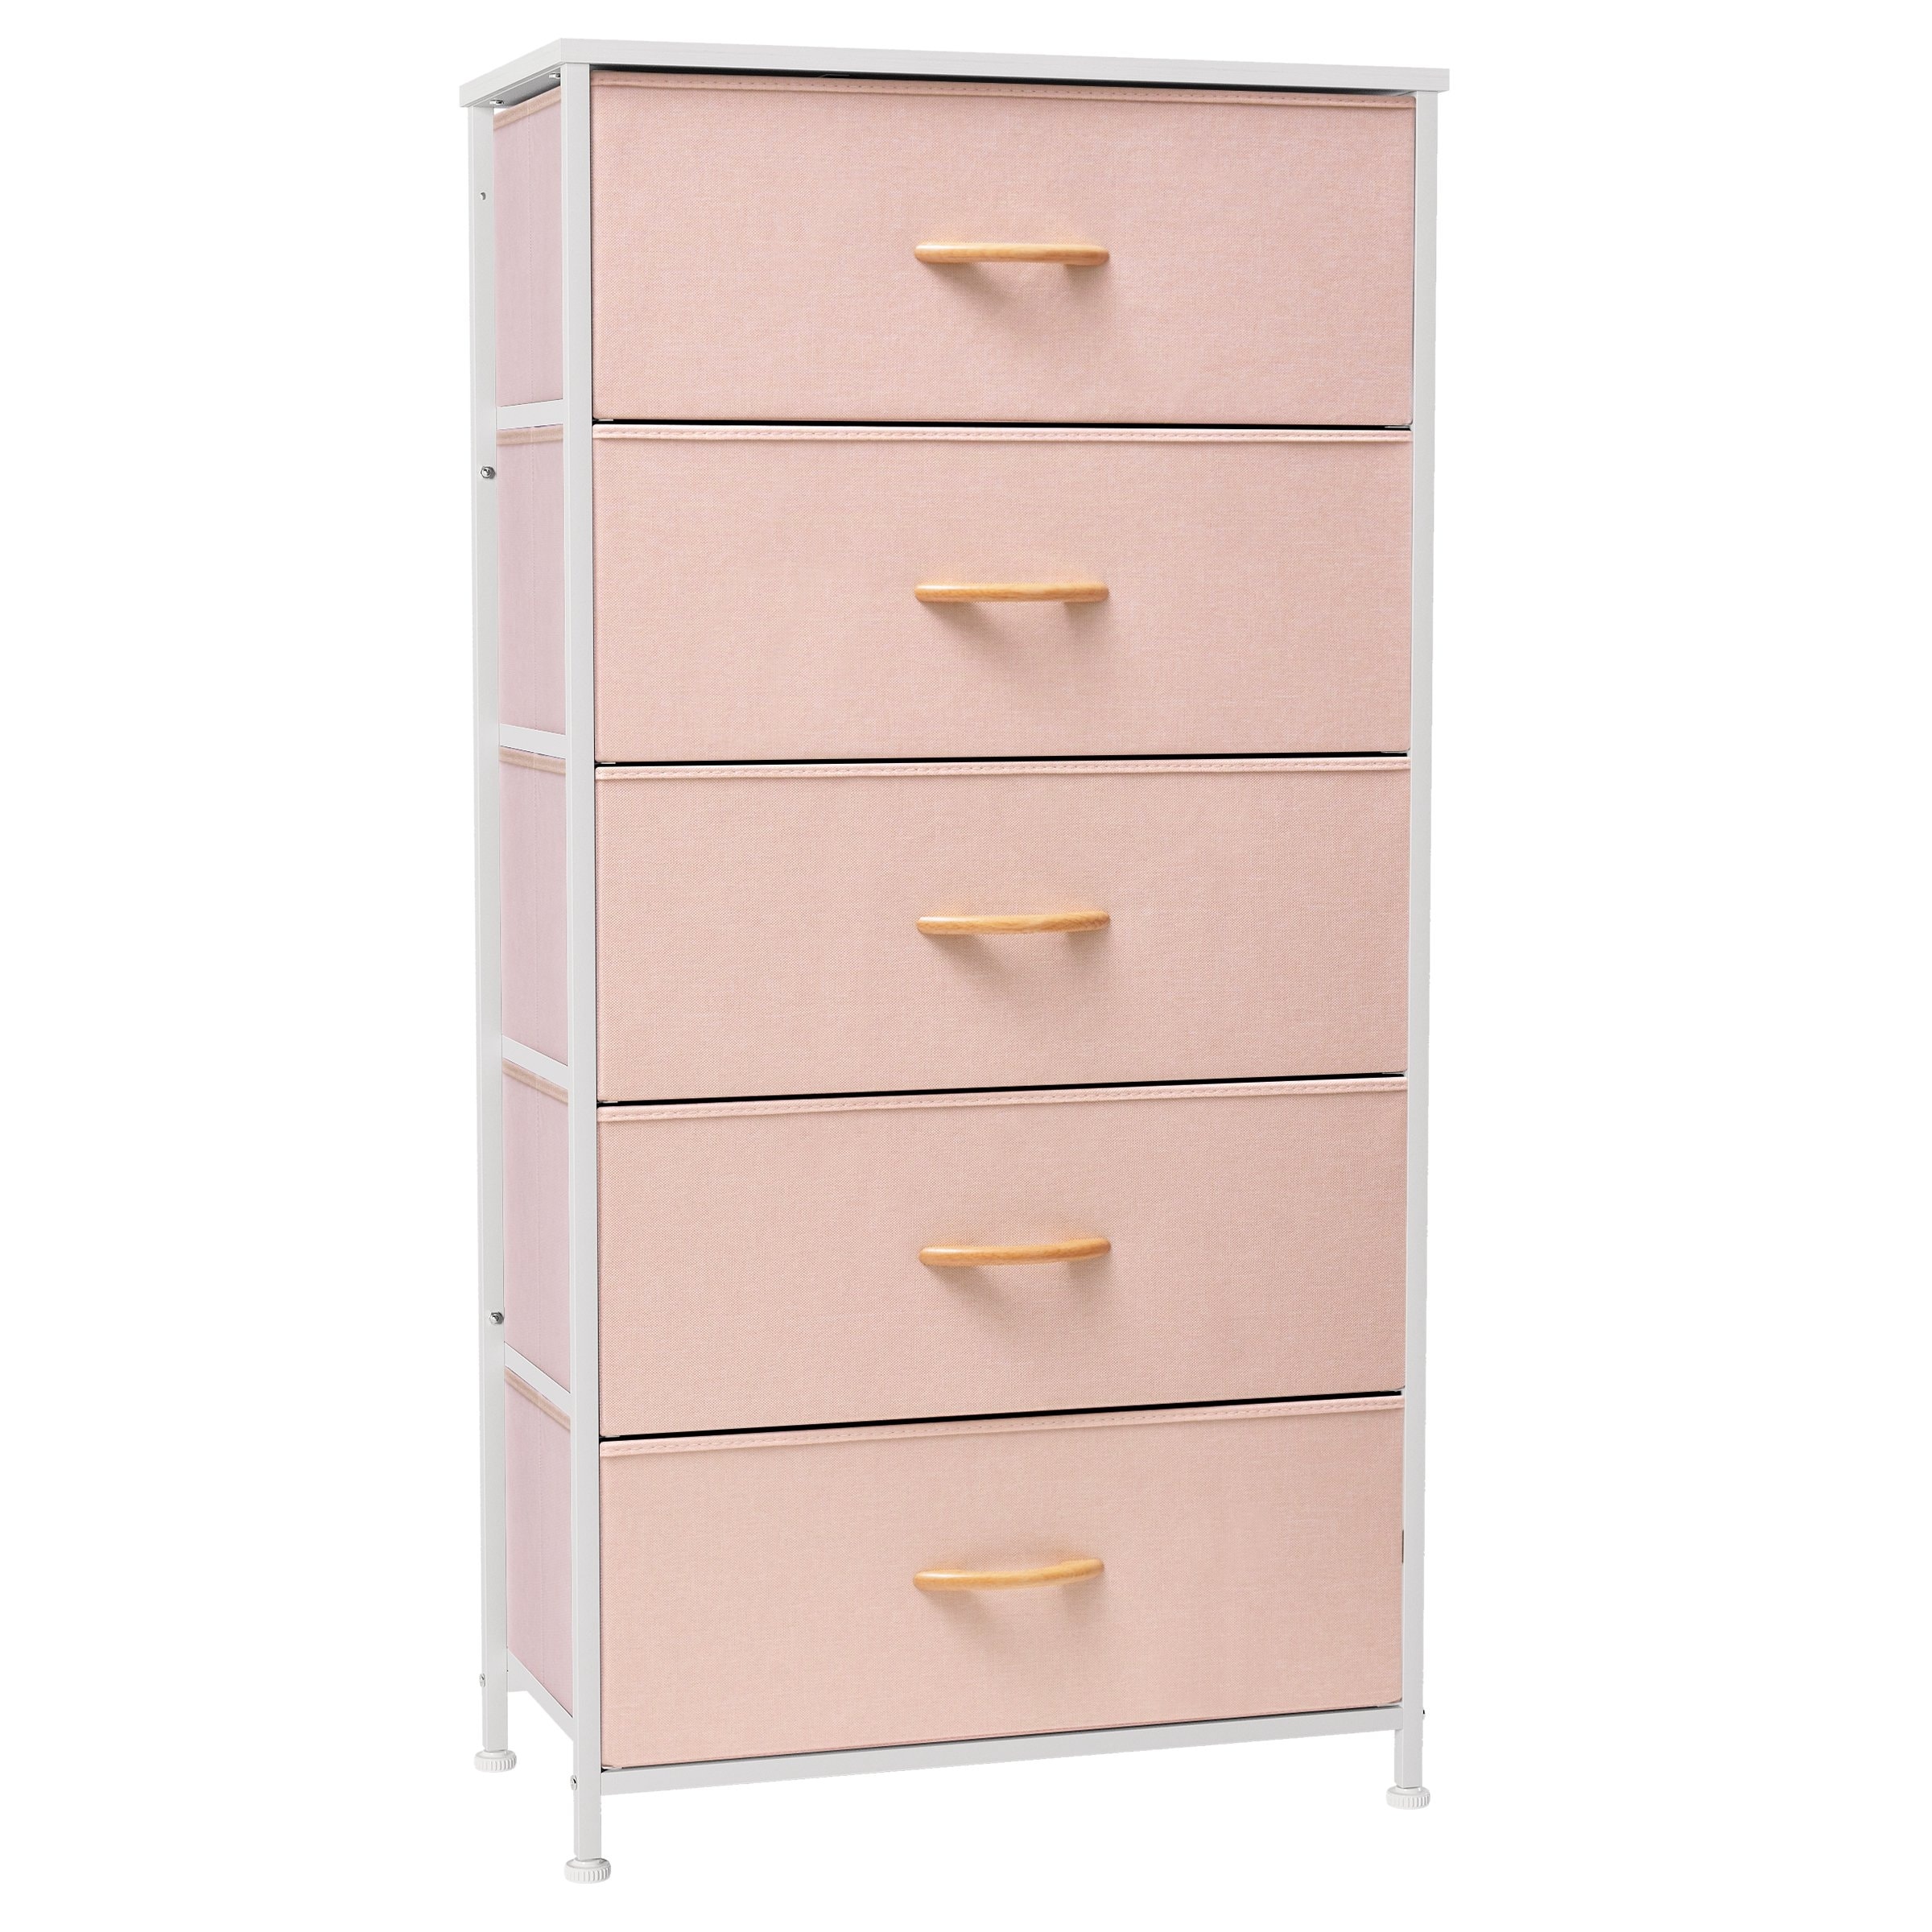 https://ak1.ostkcdn.com/images/products/is/images/direct/94350e14565bd32f020a4220f8e13a128769a089/5-Drawers-Vertical-Dresser-Storage-Tower-Organizer-Unit-for-Bedroom.jpg